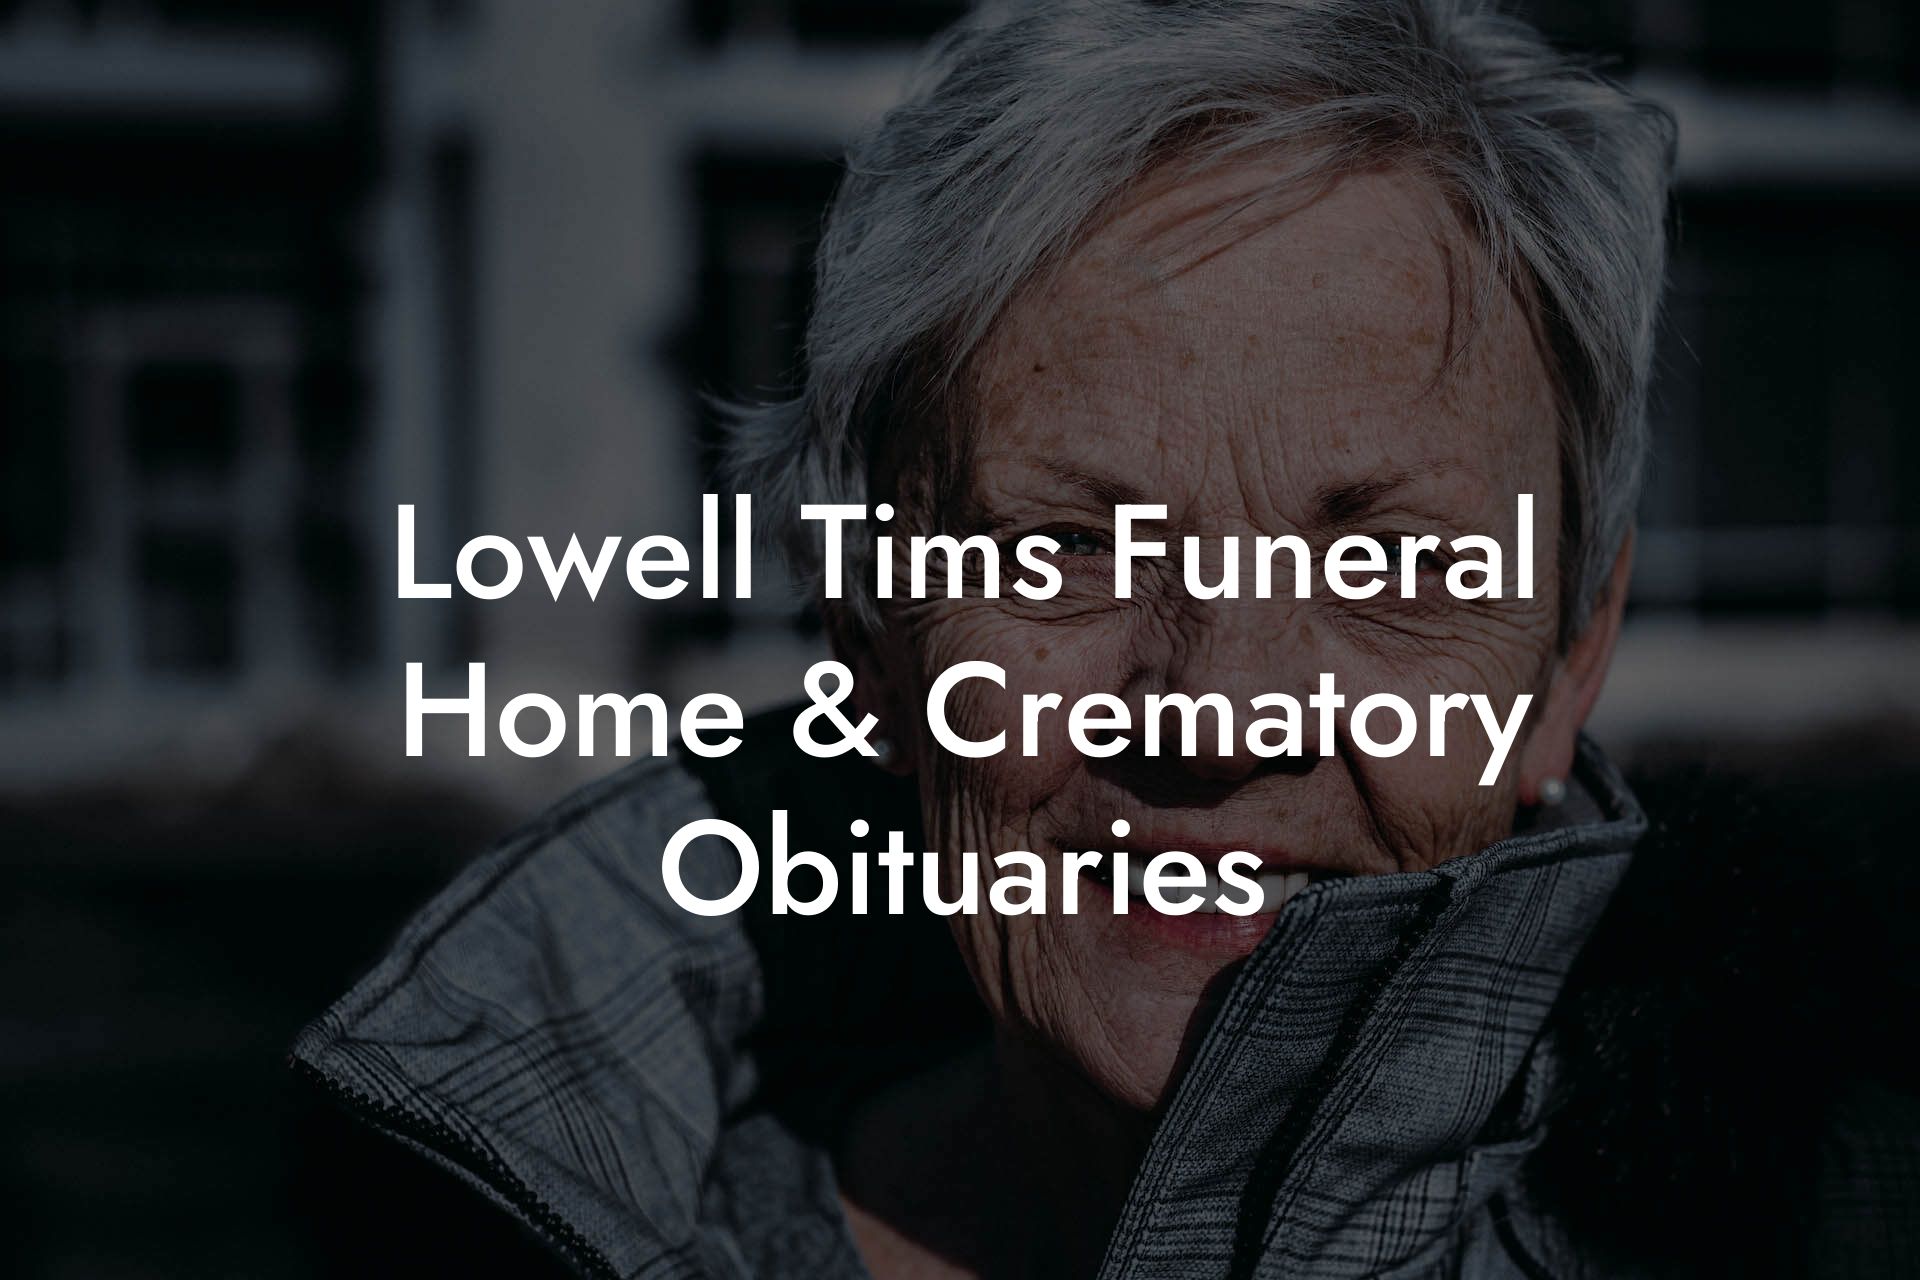 Lowell Tims Funeral Home & Crematory Obituaries